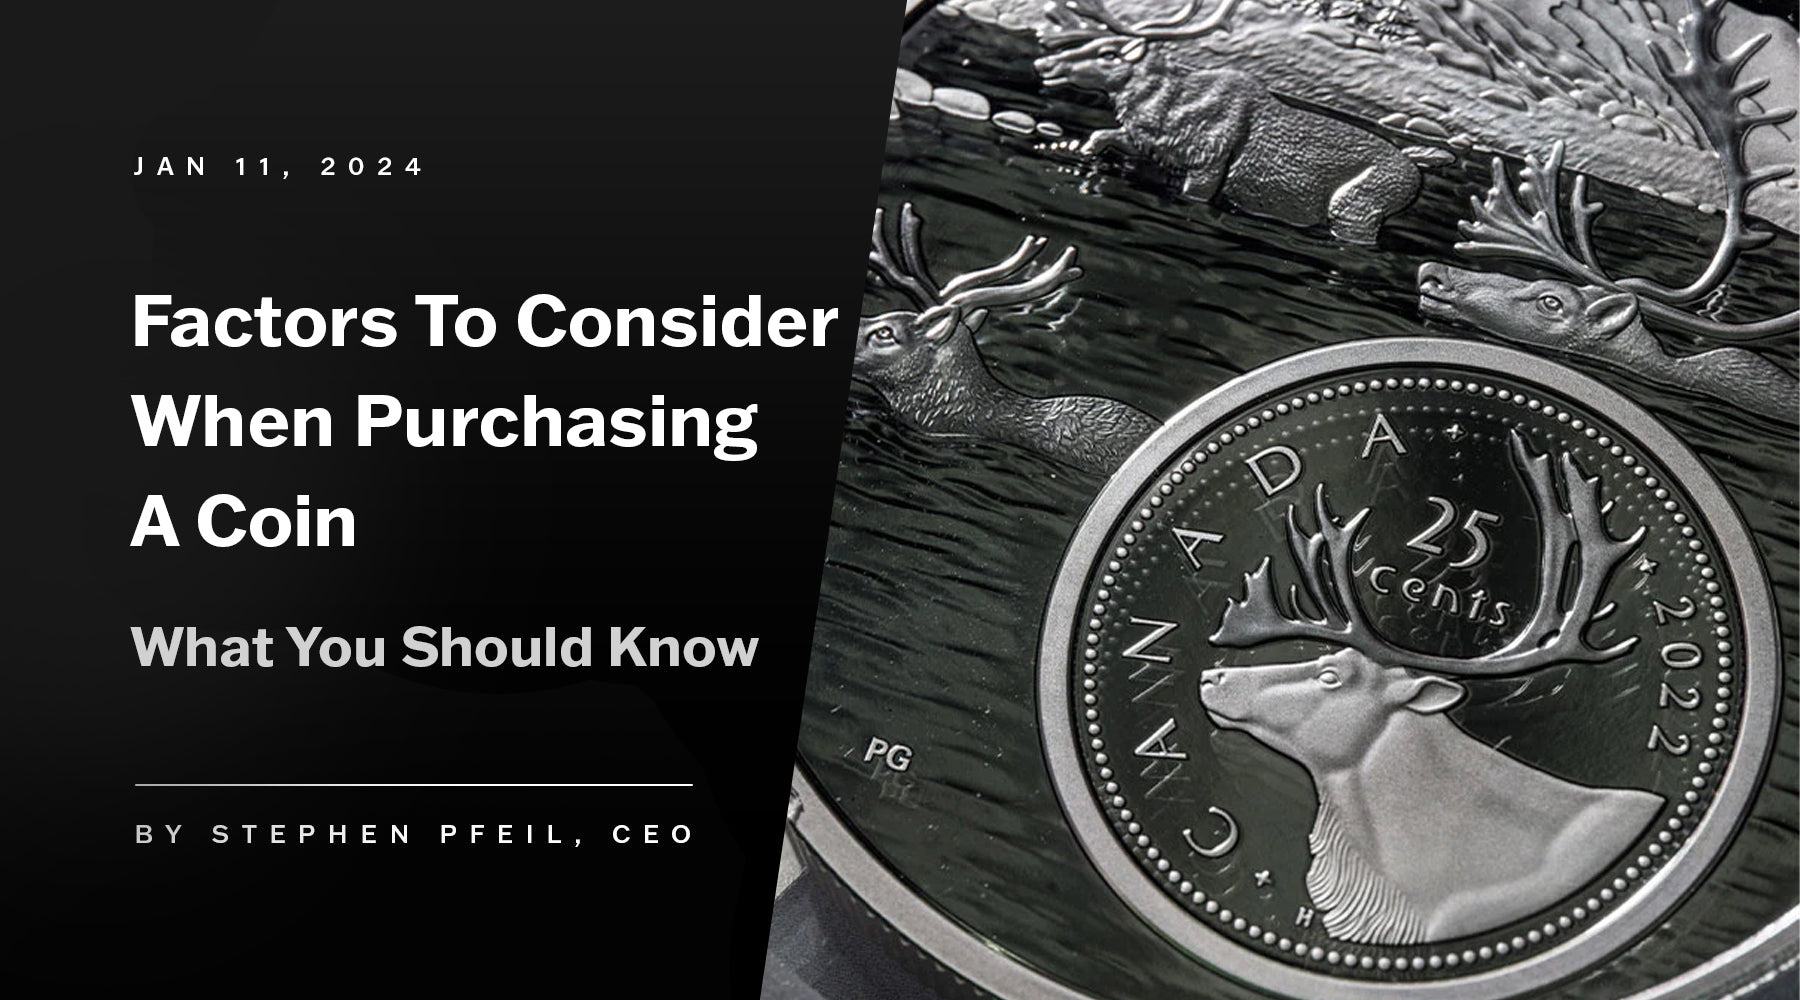 What Factors Should You Consider When Purchasing A Coin?